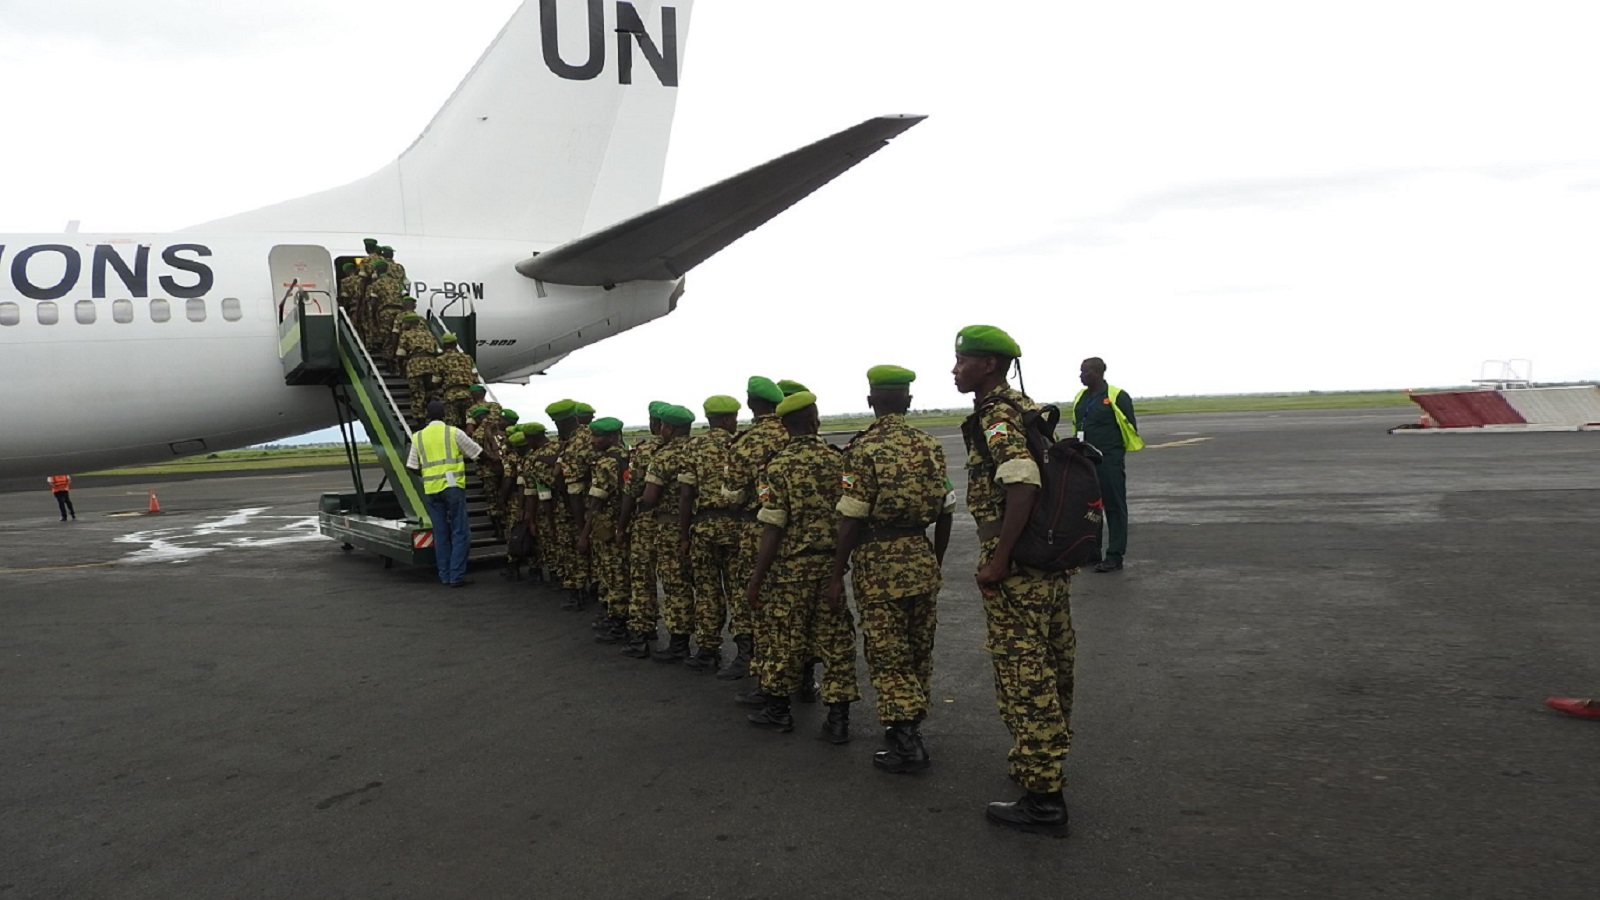 African Union, UN Envoys Commend Burundi Peacekeepers’ Efforts in Stabilizing Somalia